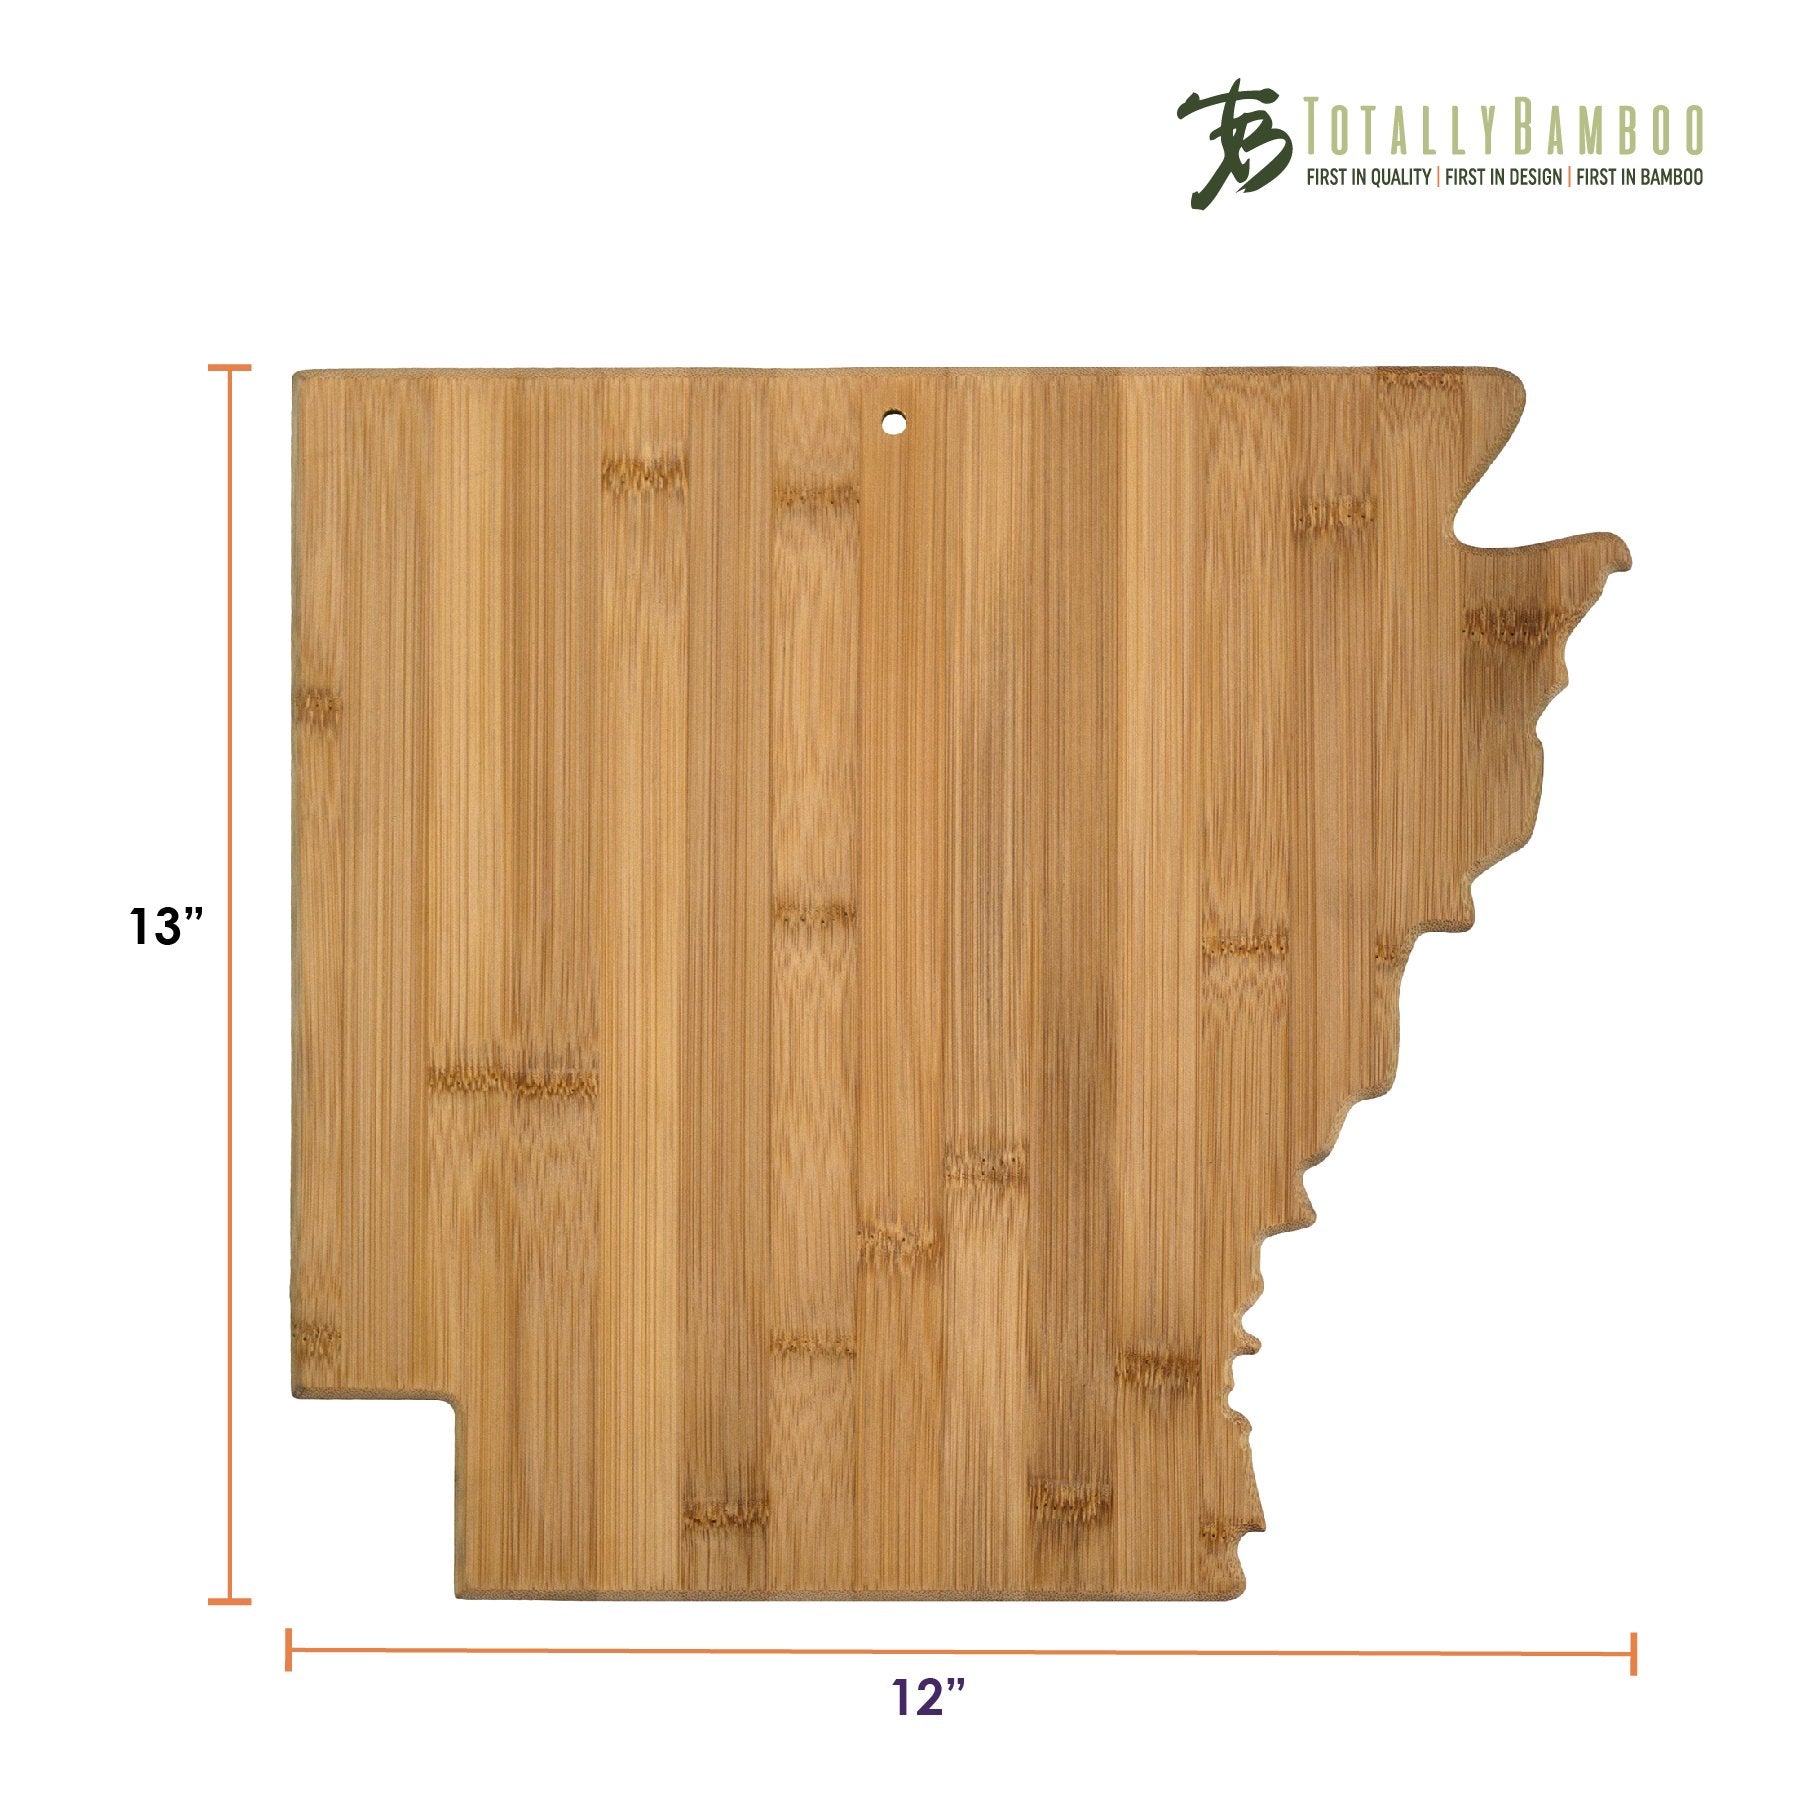 Arkansas shaped board with measurements.